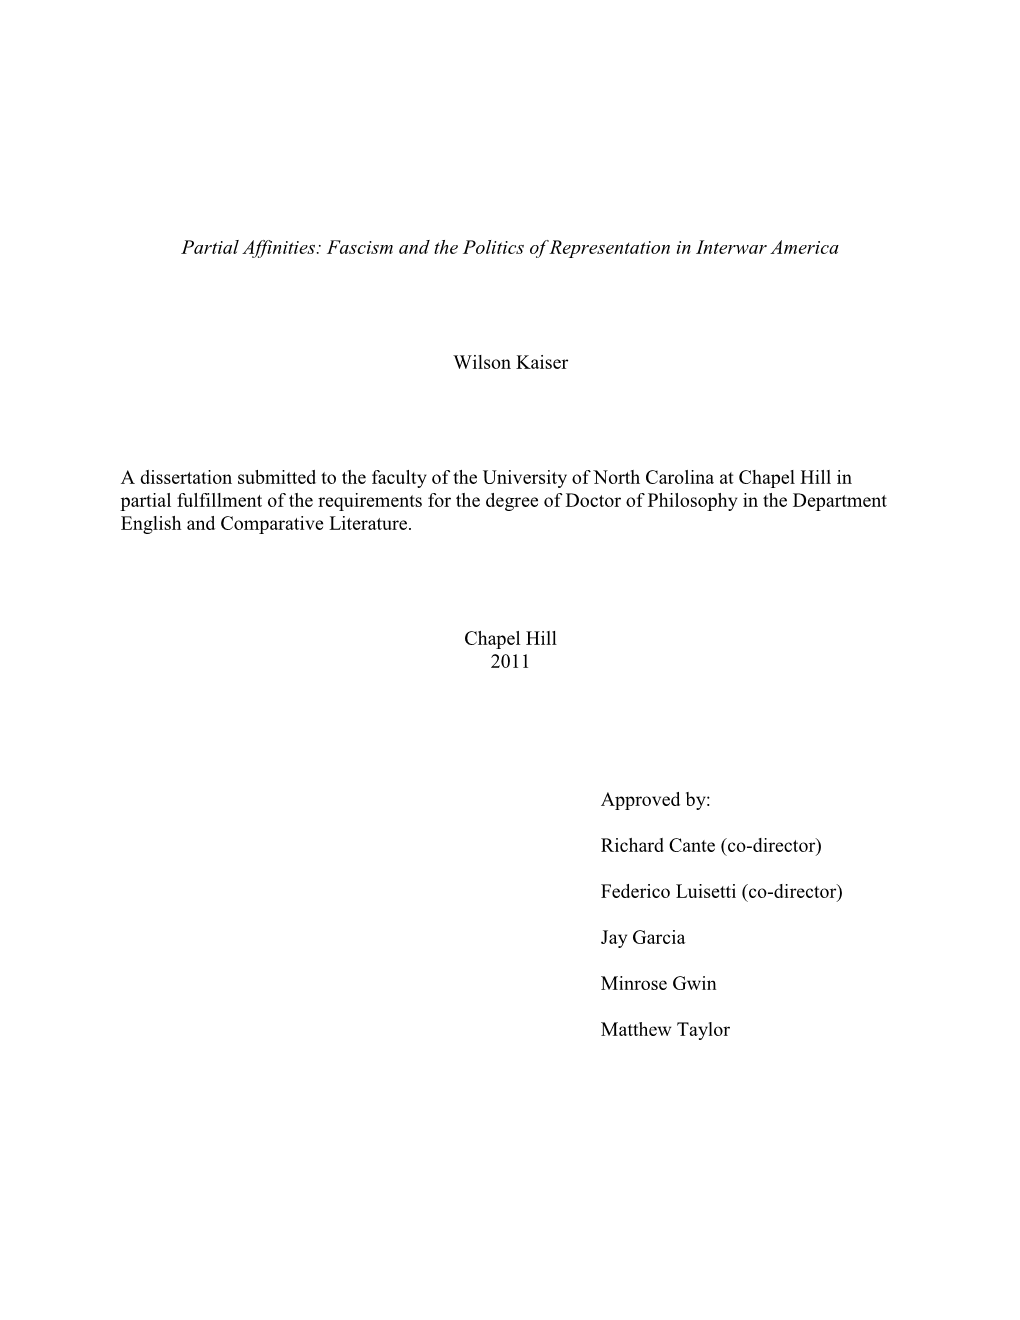 Fascism and the Politics of Representation in Interwar America Wilson Kaiser a Dissertation Submitted To